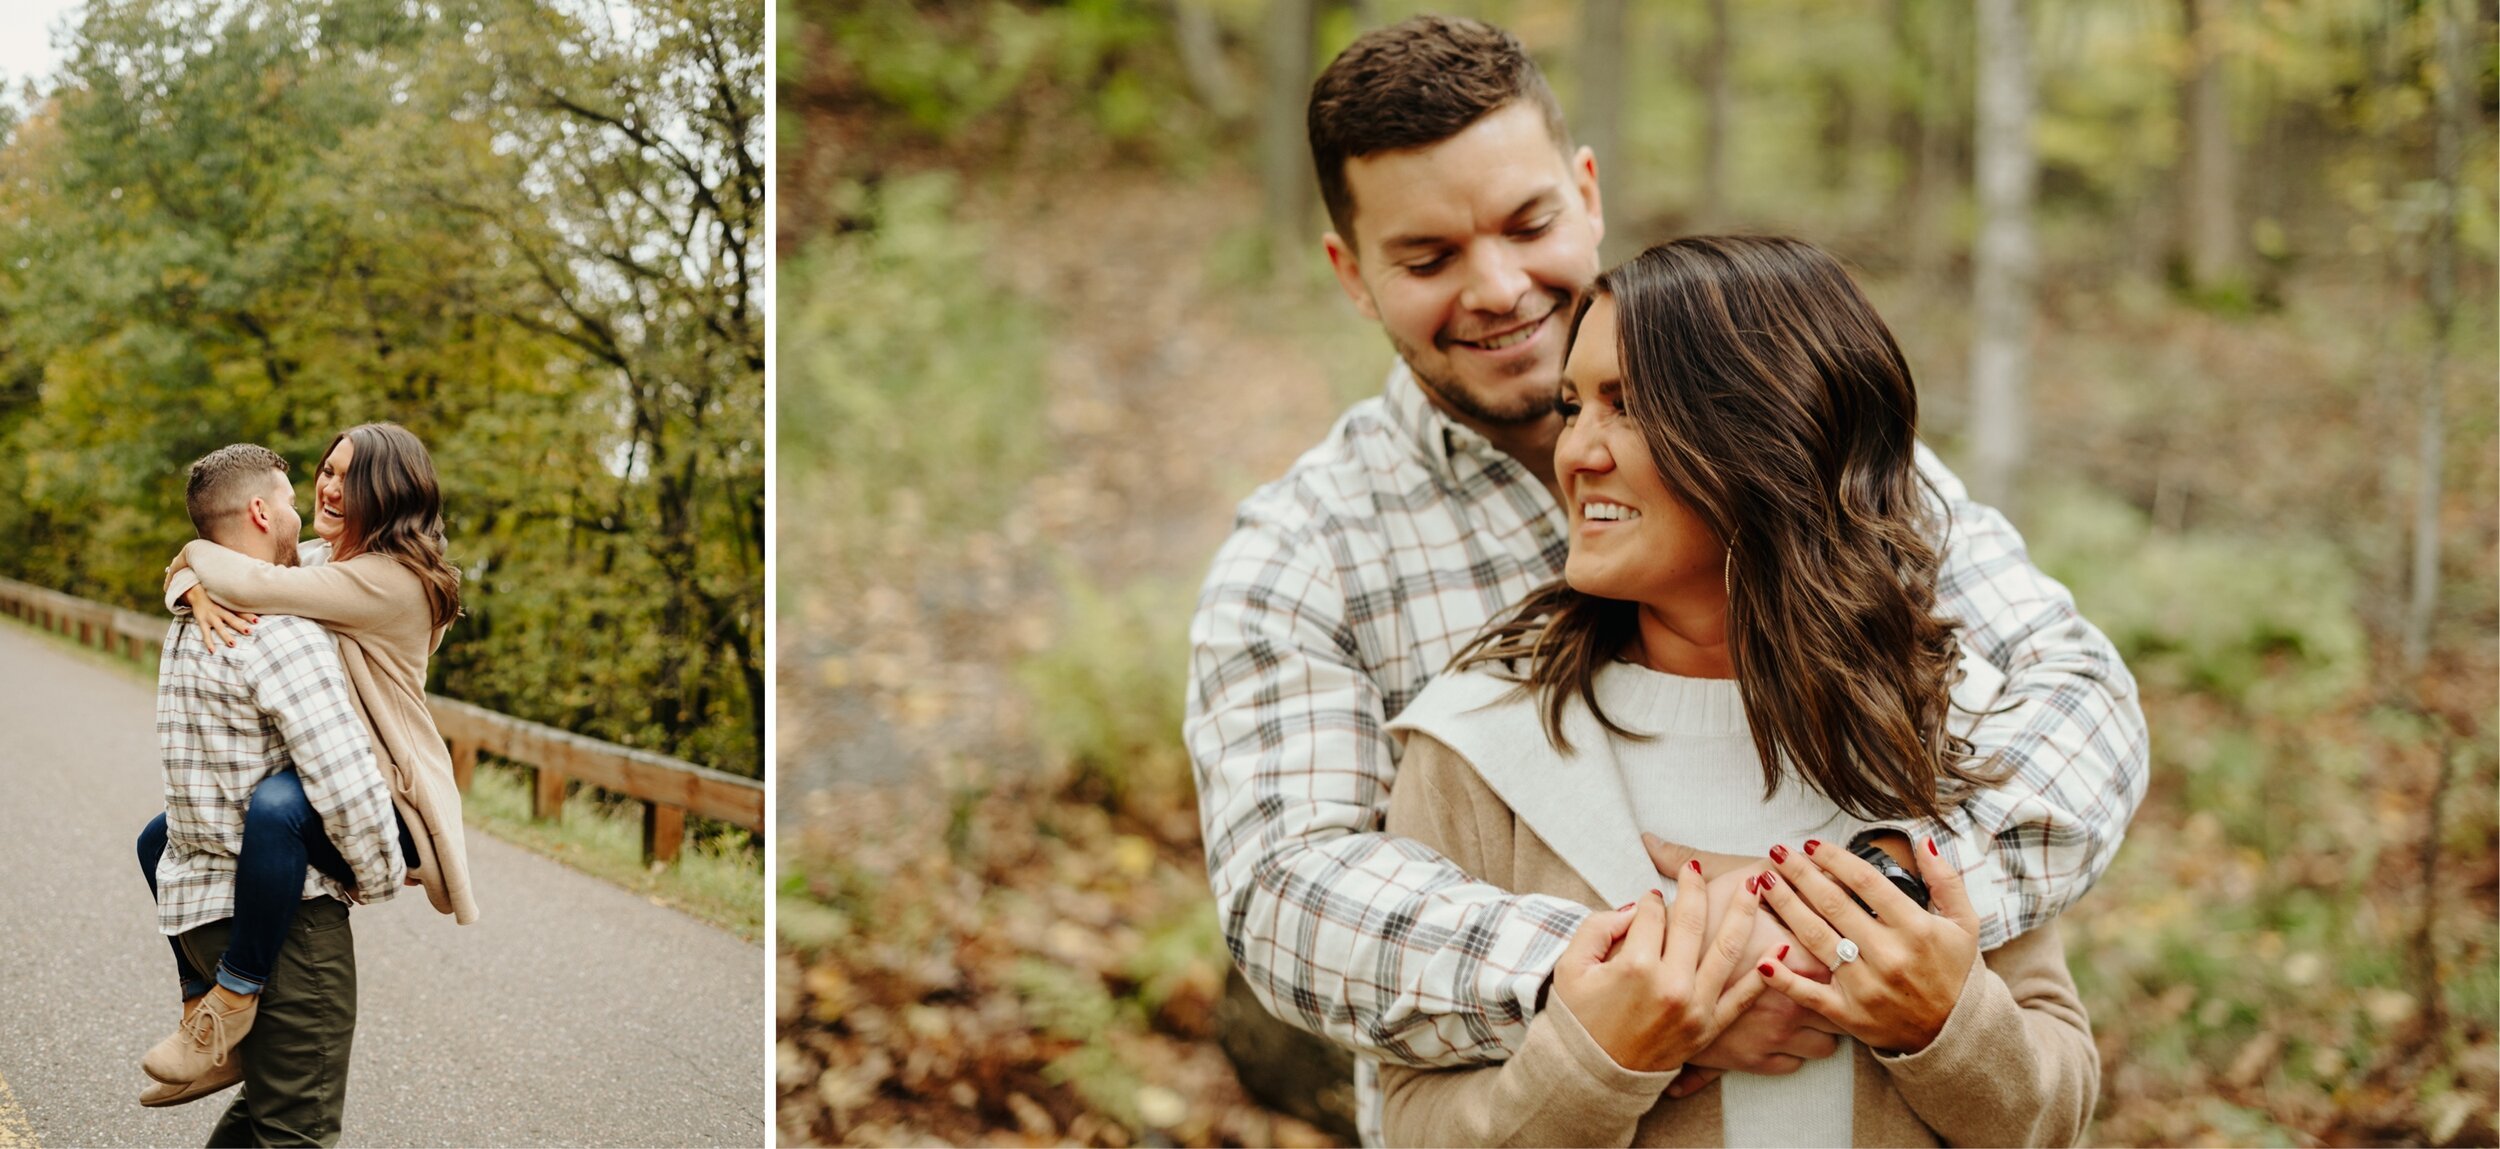 11_taylors-falls-engagement-session-interstate-park-mckenzie-josh-31_taylors-falls-engagement-session-interstate-park-mckenzie-josh-18.jpg